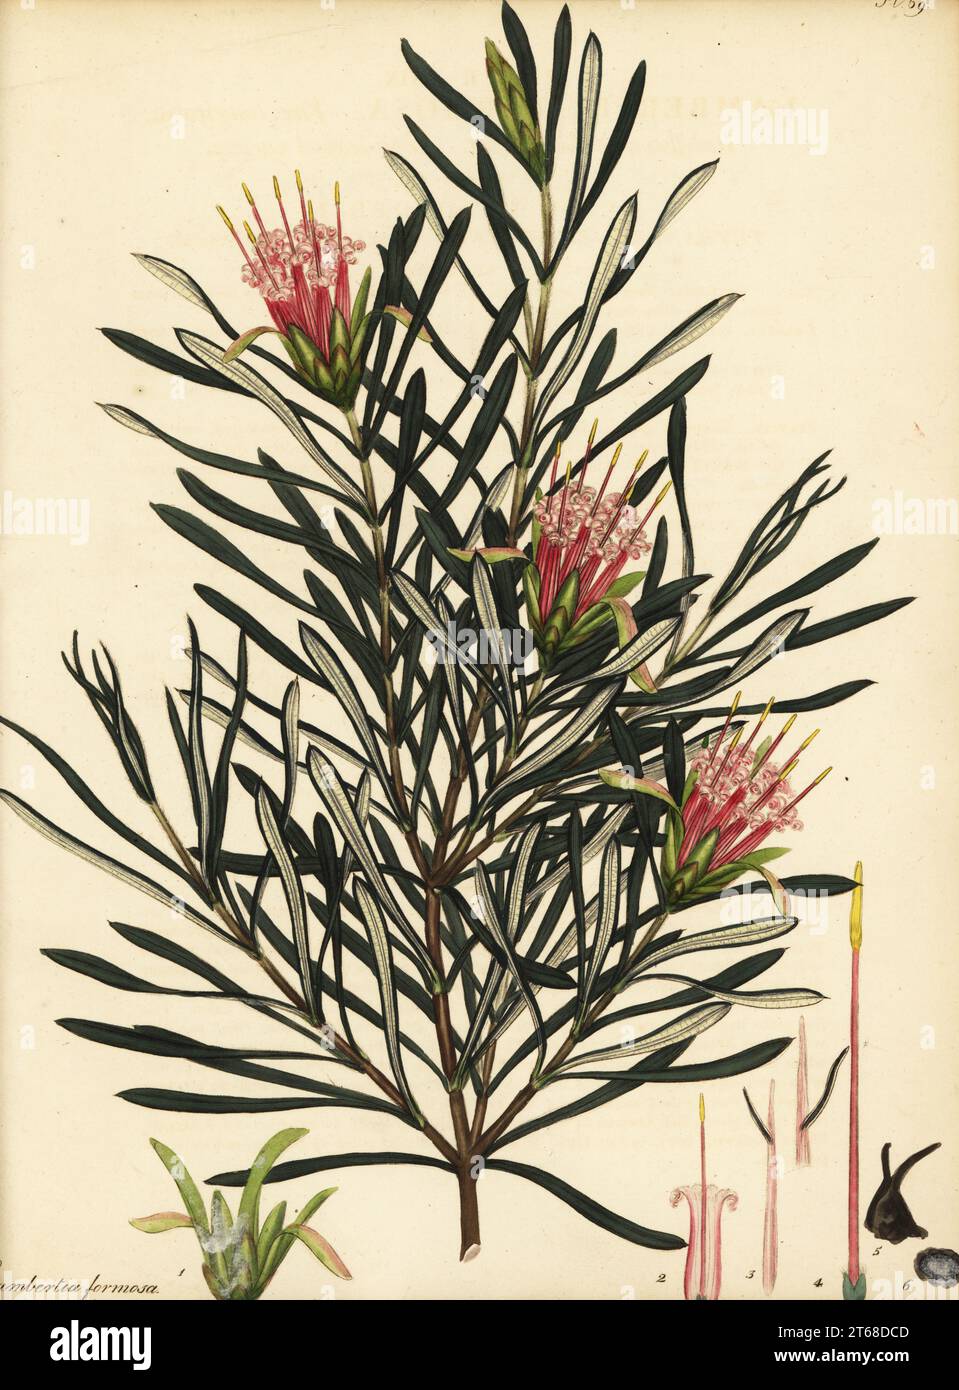 Mountain devil, Lambertia formosa. New South Wales, Australia. Red-flowered lambertia, long-leaved variety, Lambertia formosa var. longifolia. Copperplate engraving drawn, engraved and hand-coloured by Henry Andrews from his Botanical Register, Volume 1, published in London, 1799. Stock Photo